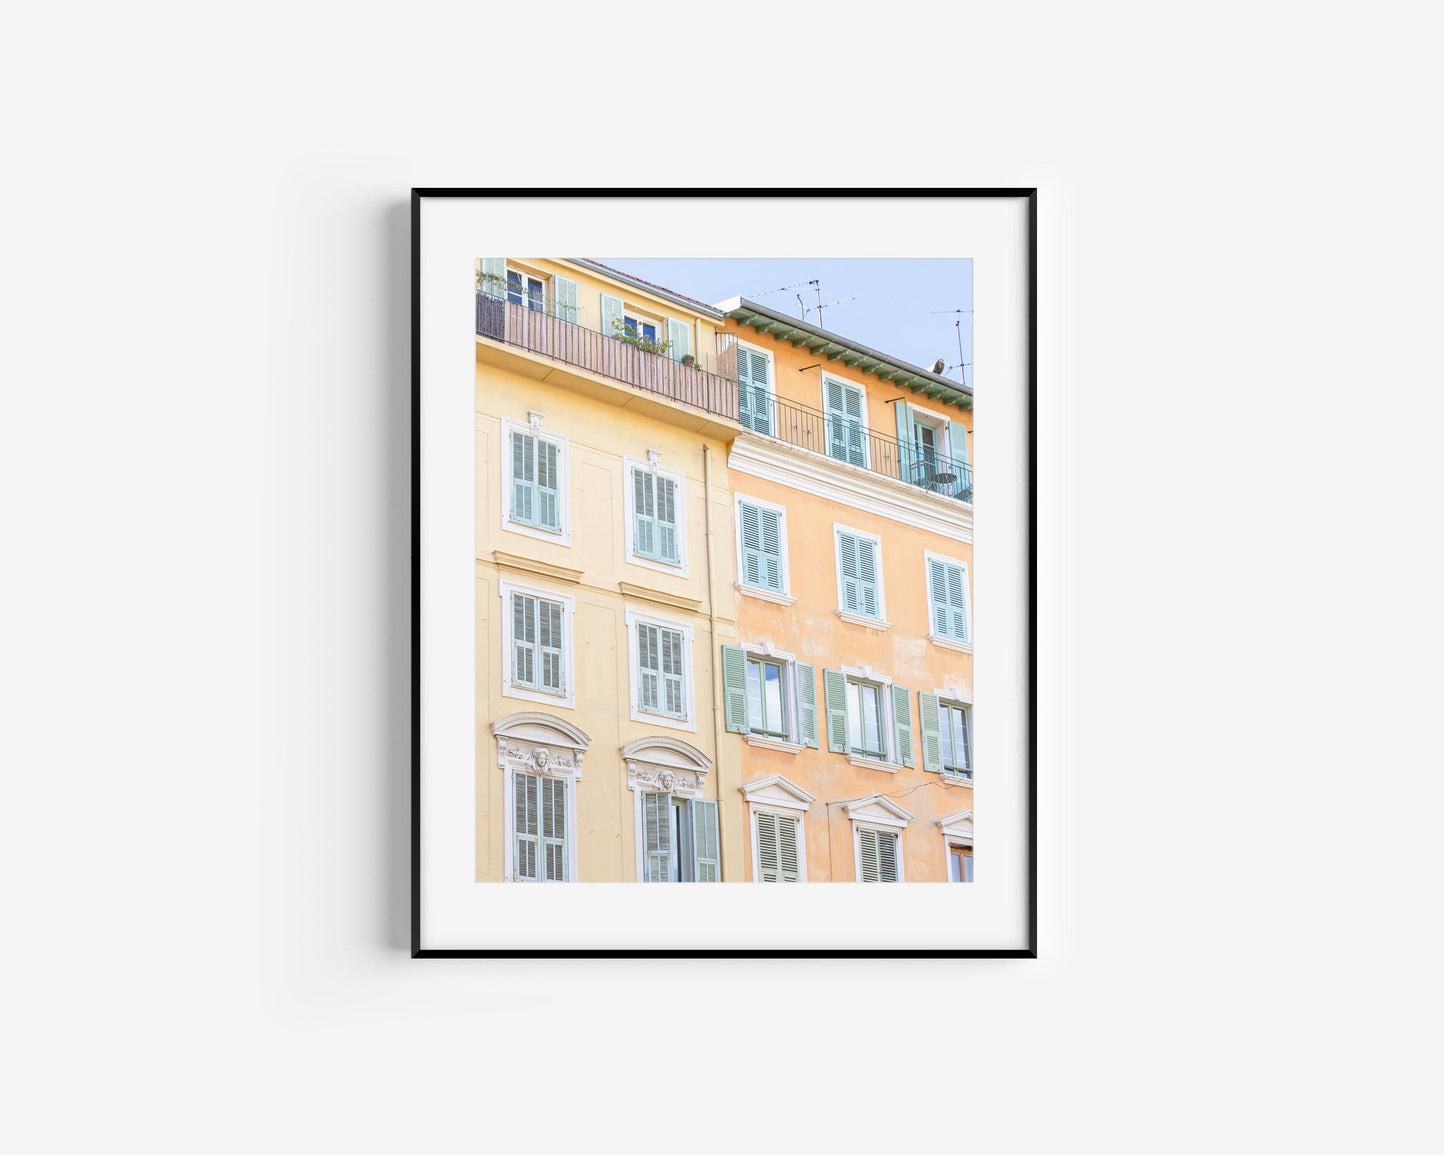 Colorful Nice Architecture II | French Riviera Print - Departures Print Shop